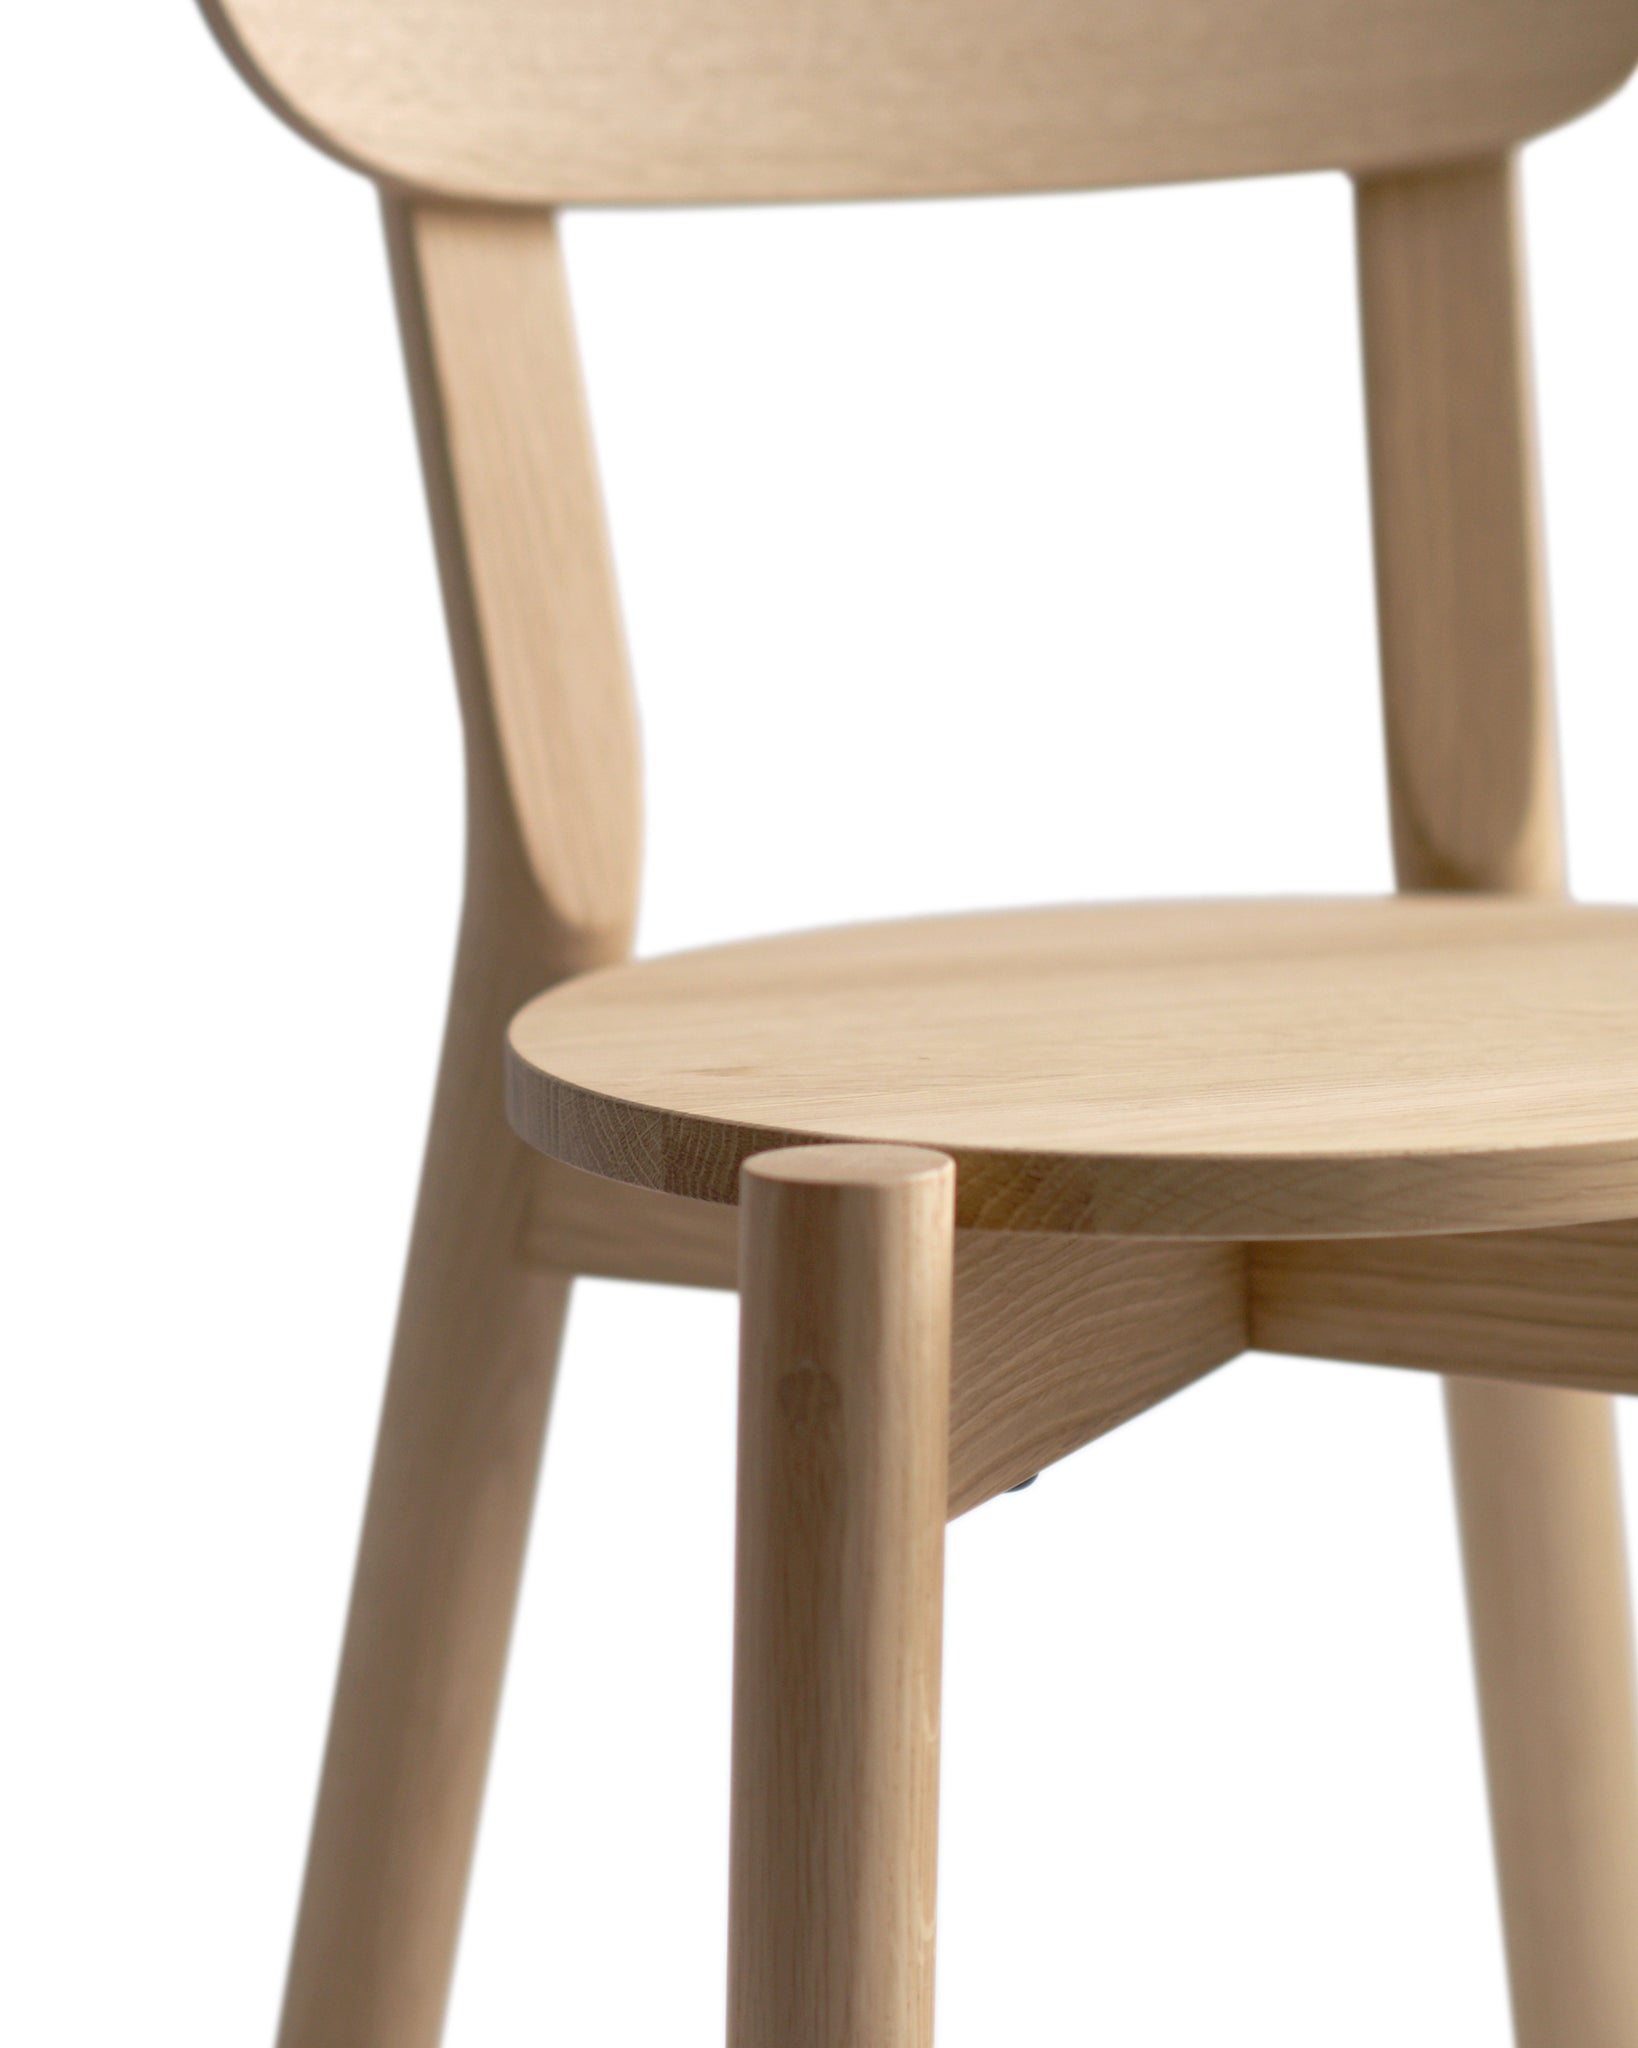 Detailed image of the castor kids chair.